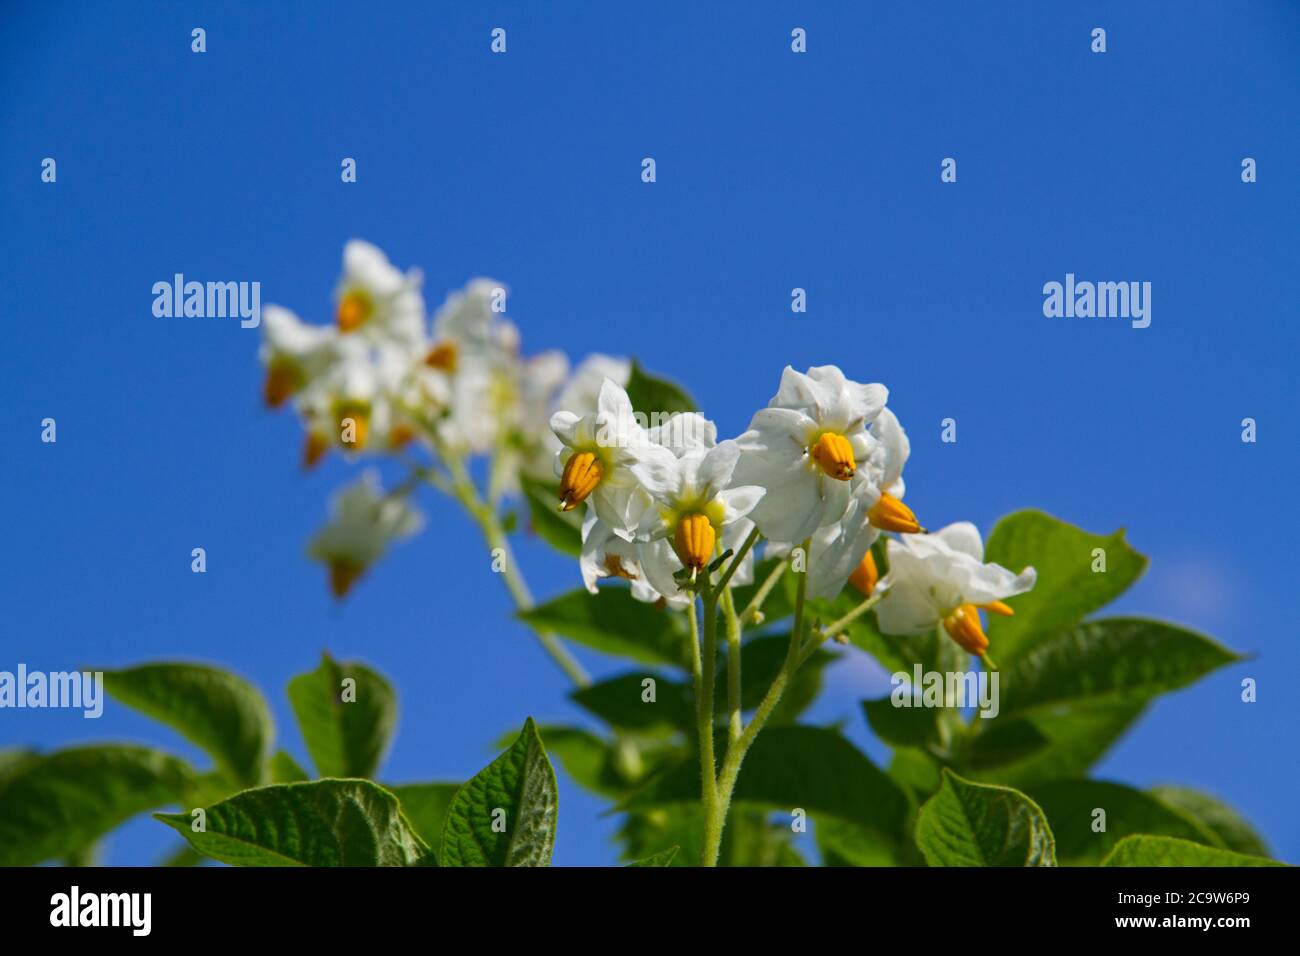 Flowers of a Potato plant with white petals and yellow stamens againts a blue sky Stock Photo